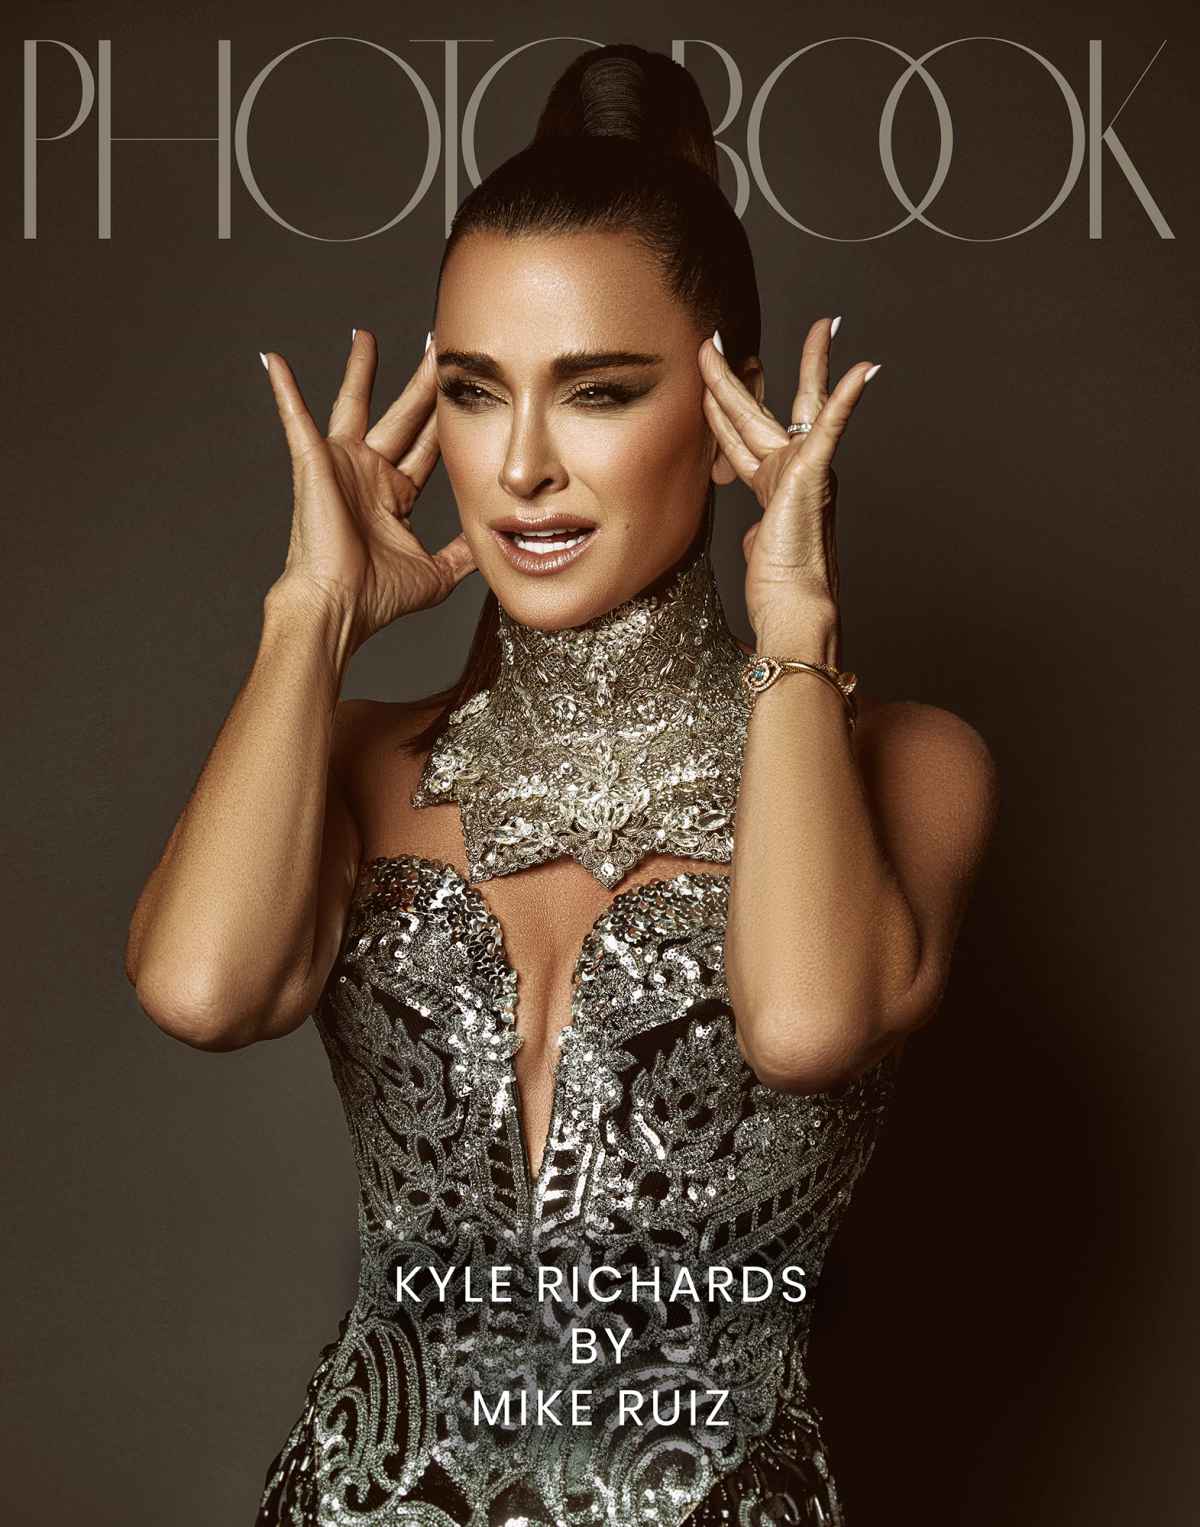 Kyle Richards covers magazine wearing nothing but bling